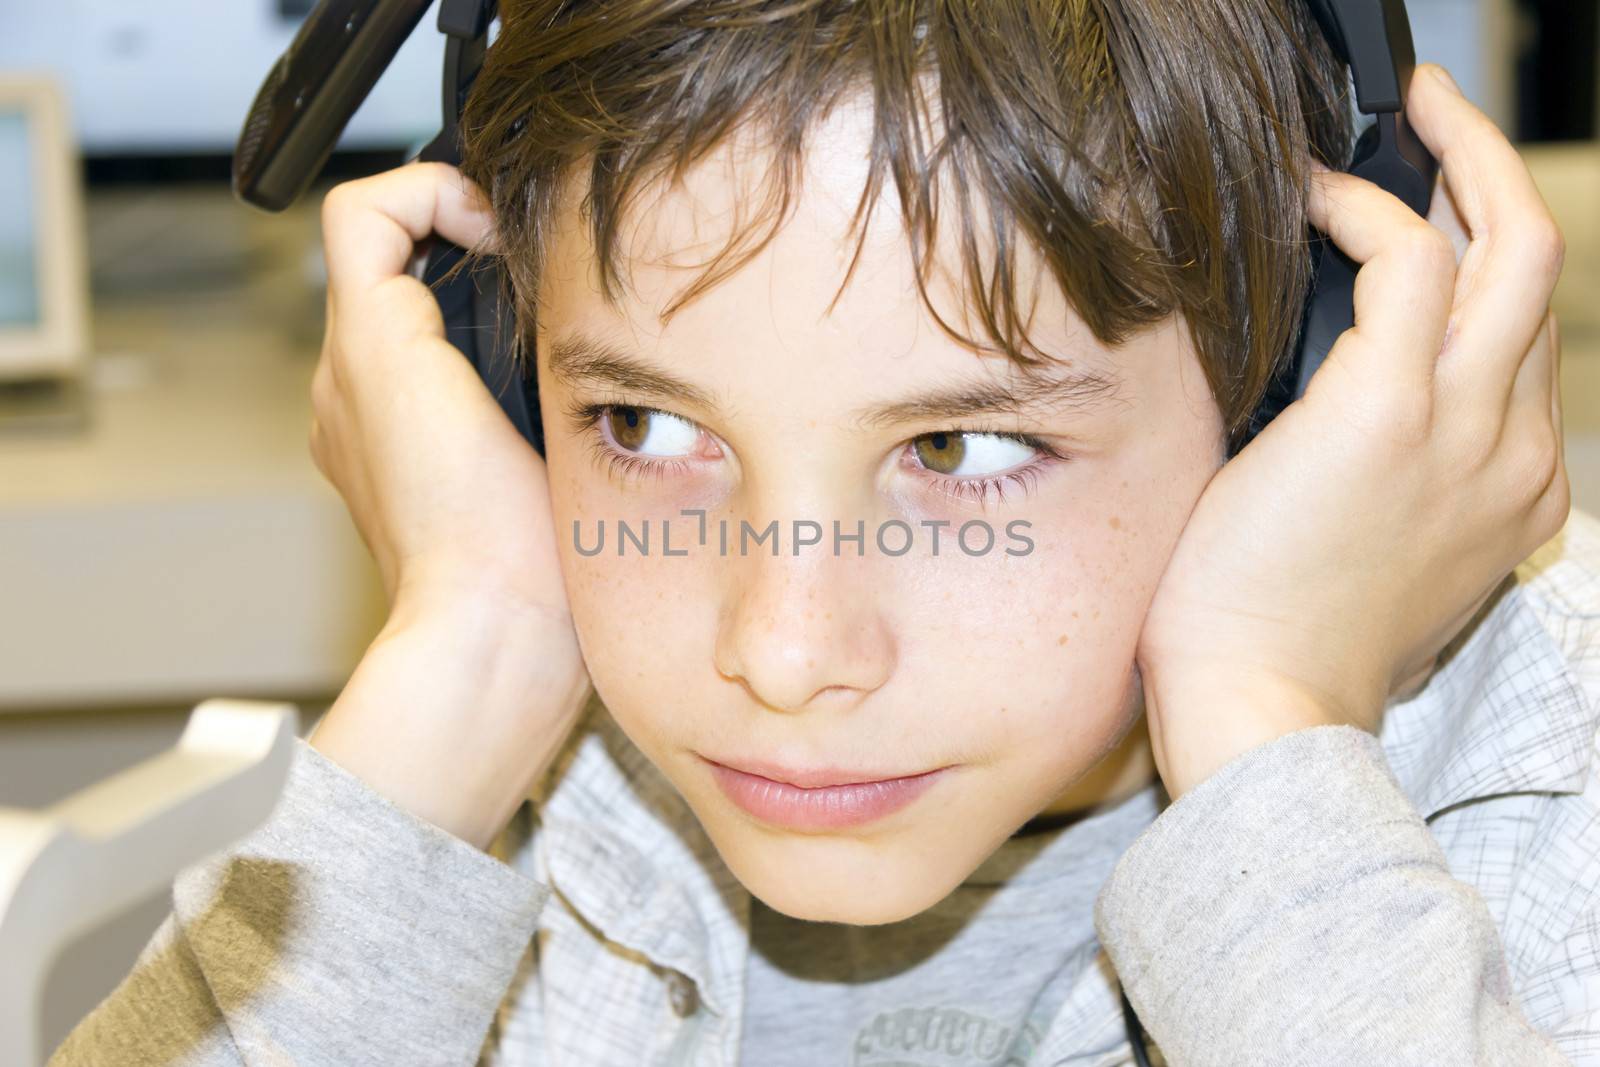 Portrait of a sweet young boy listening to music on headphones